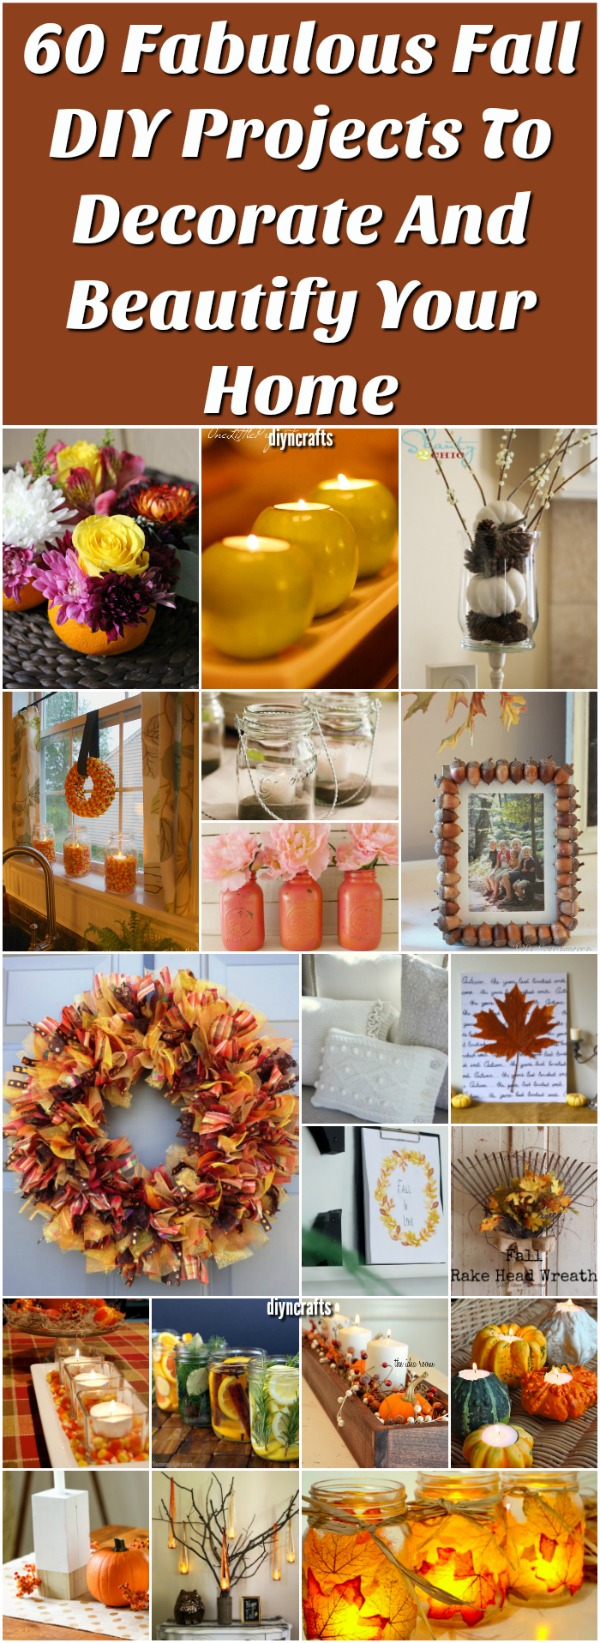 60 Fabulous Fall DIY Projects To Decorate And Beautify Your Home {With tutorial links}